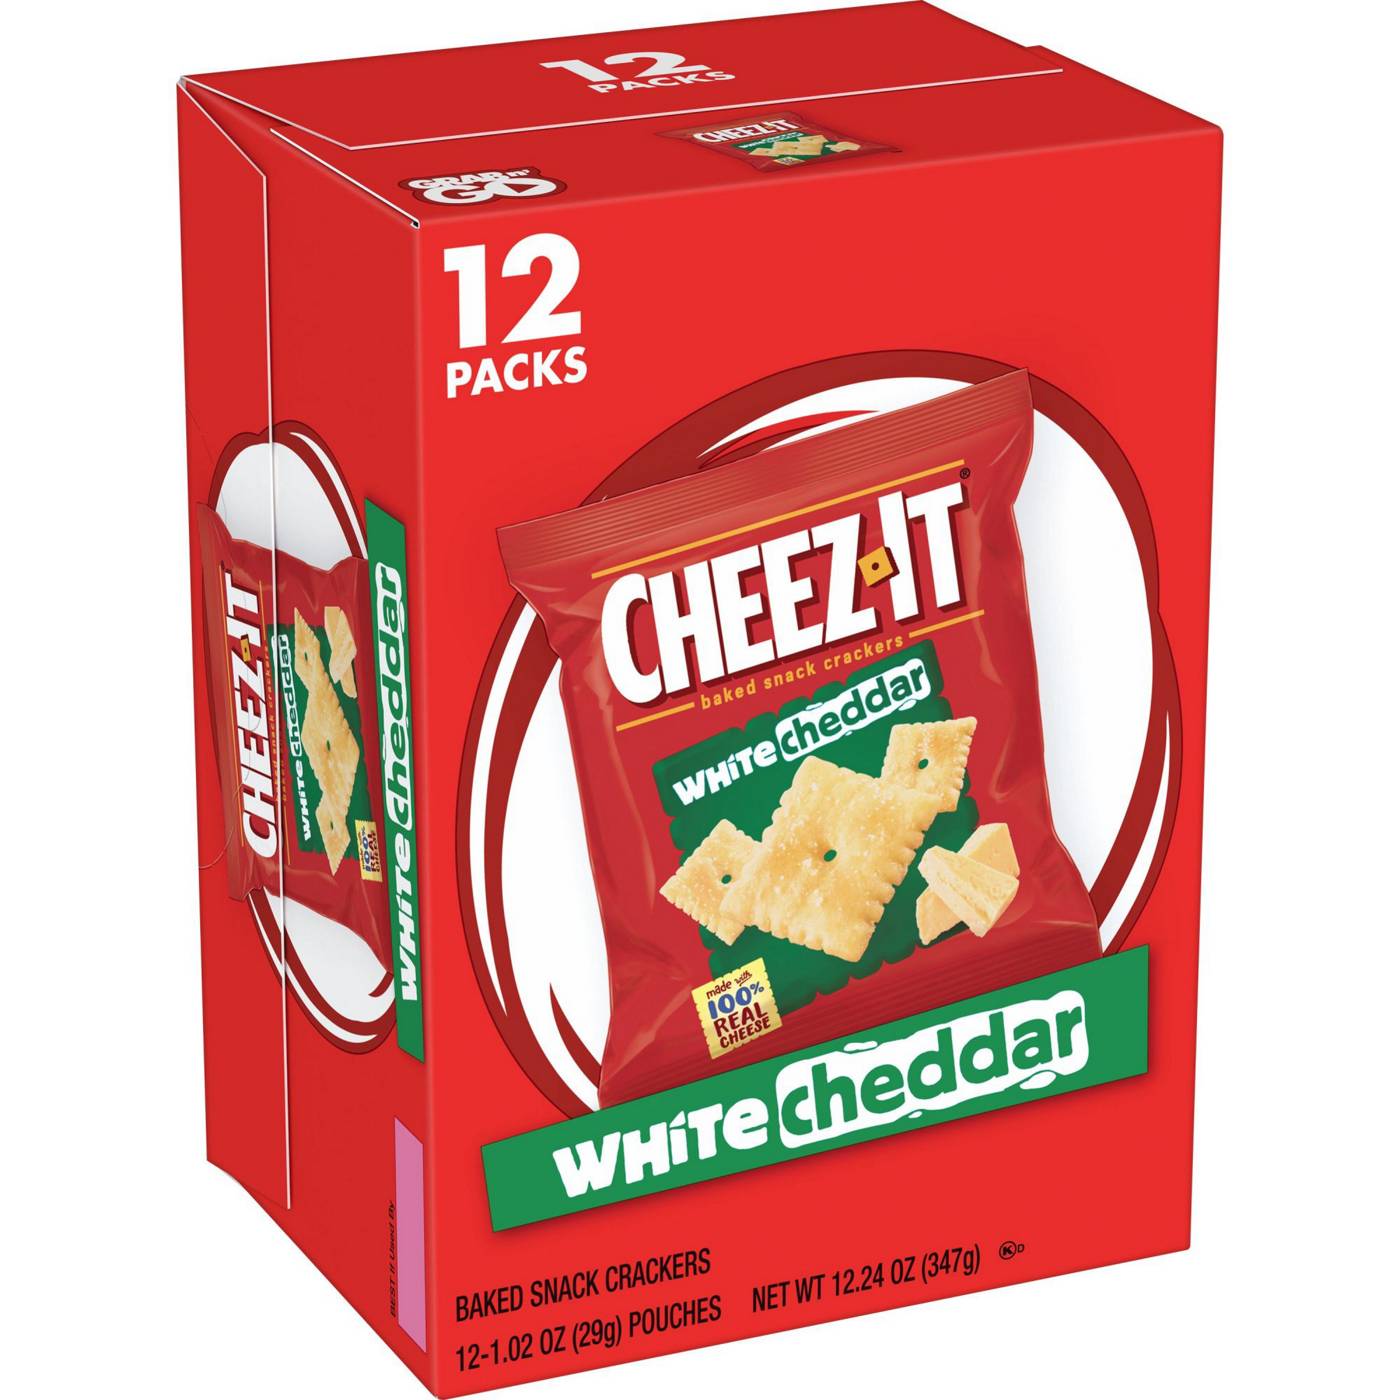 Cheez-It White Cheddar Baked Snack Crackers; image 4 of 4